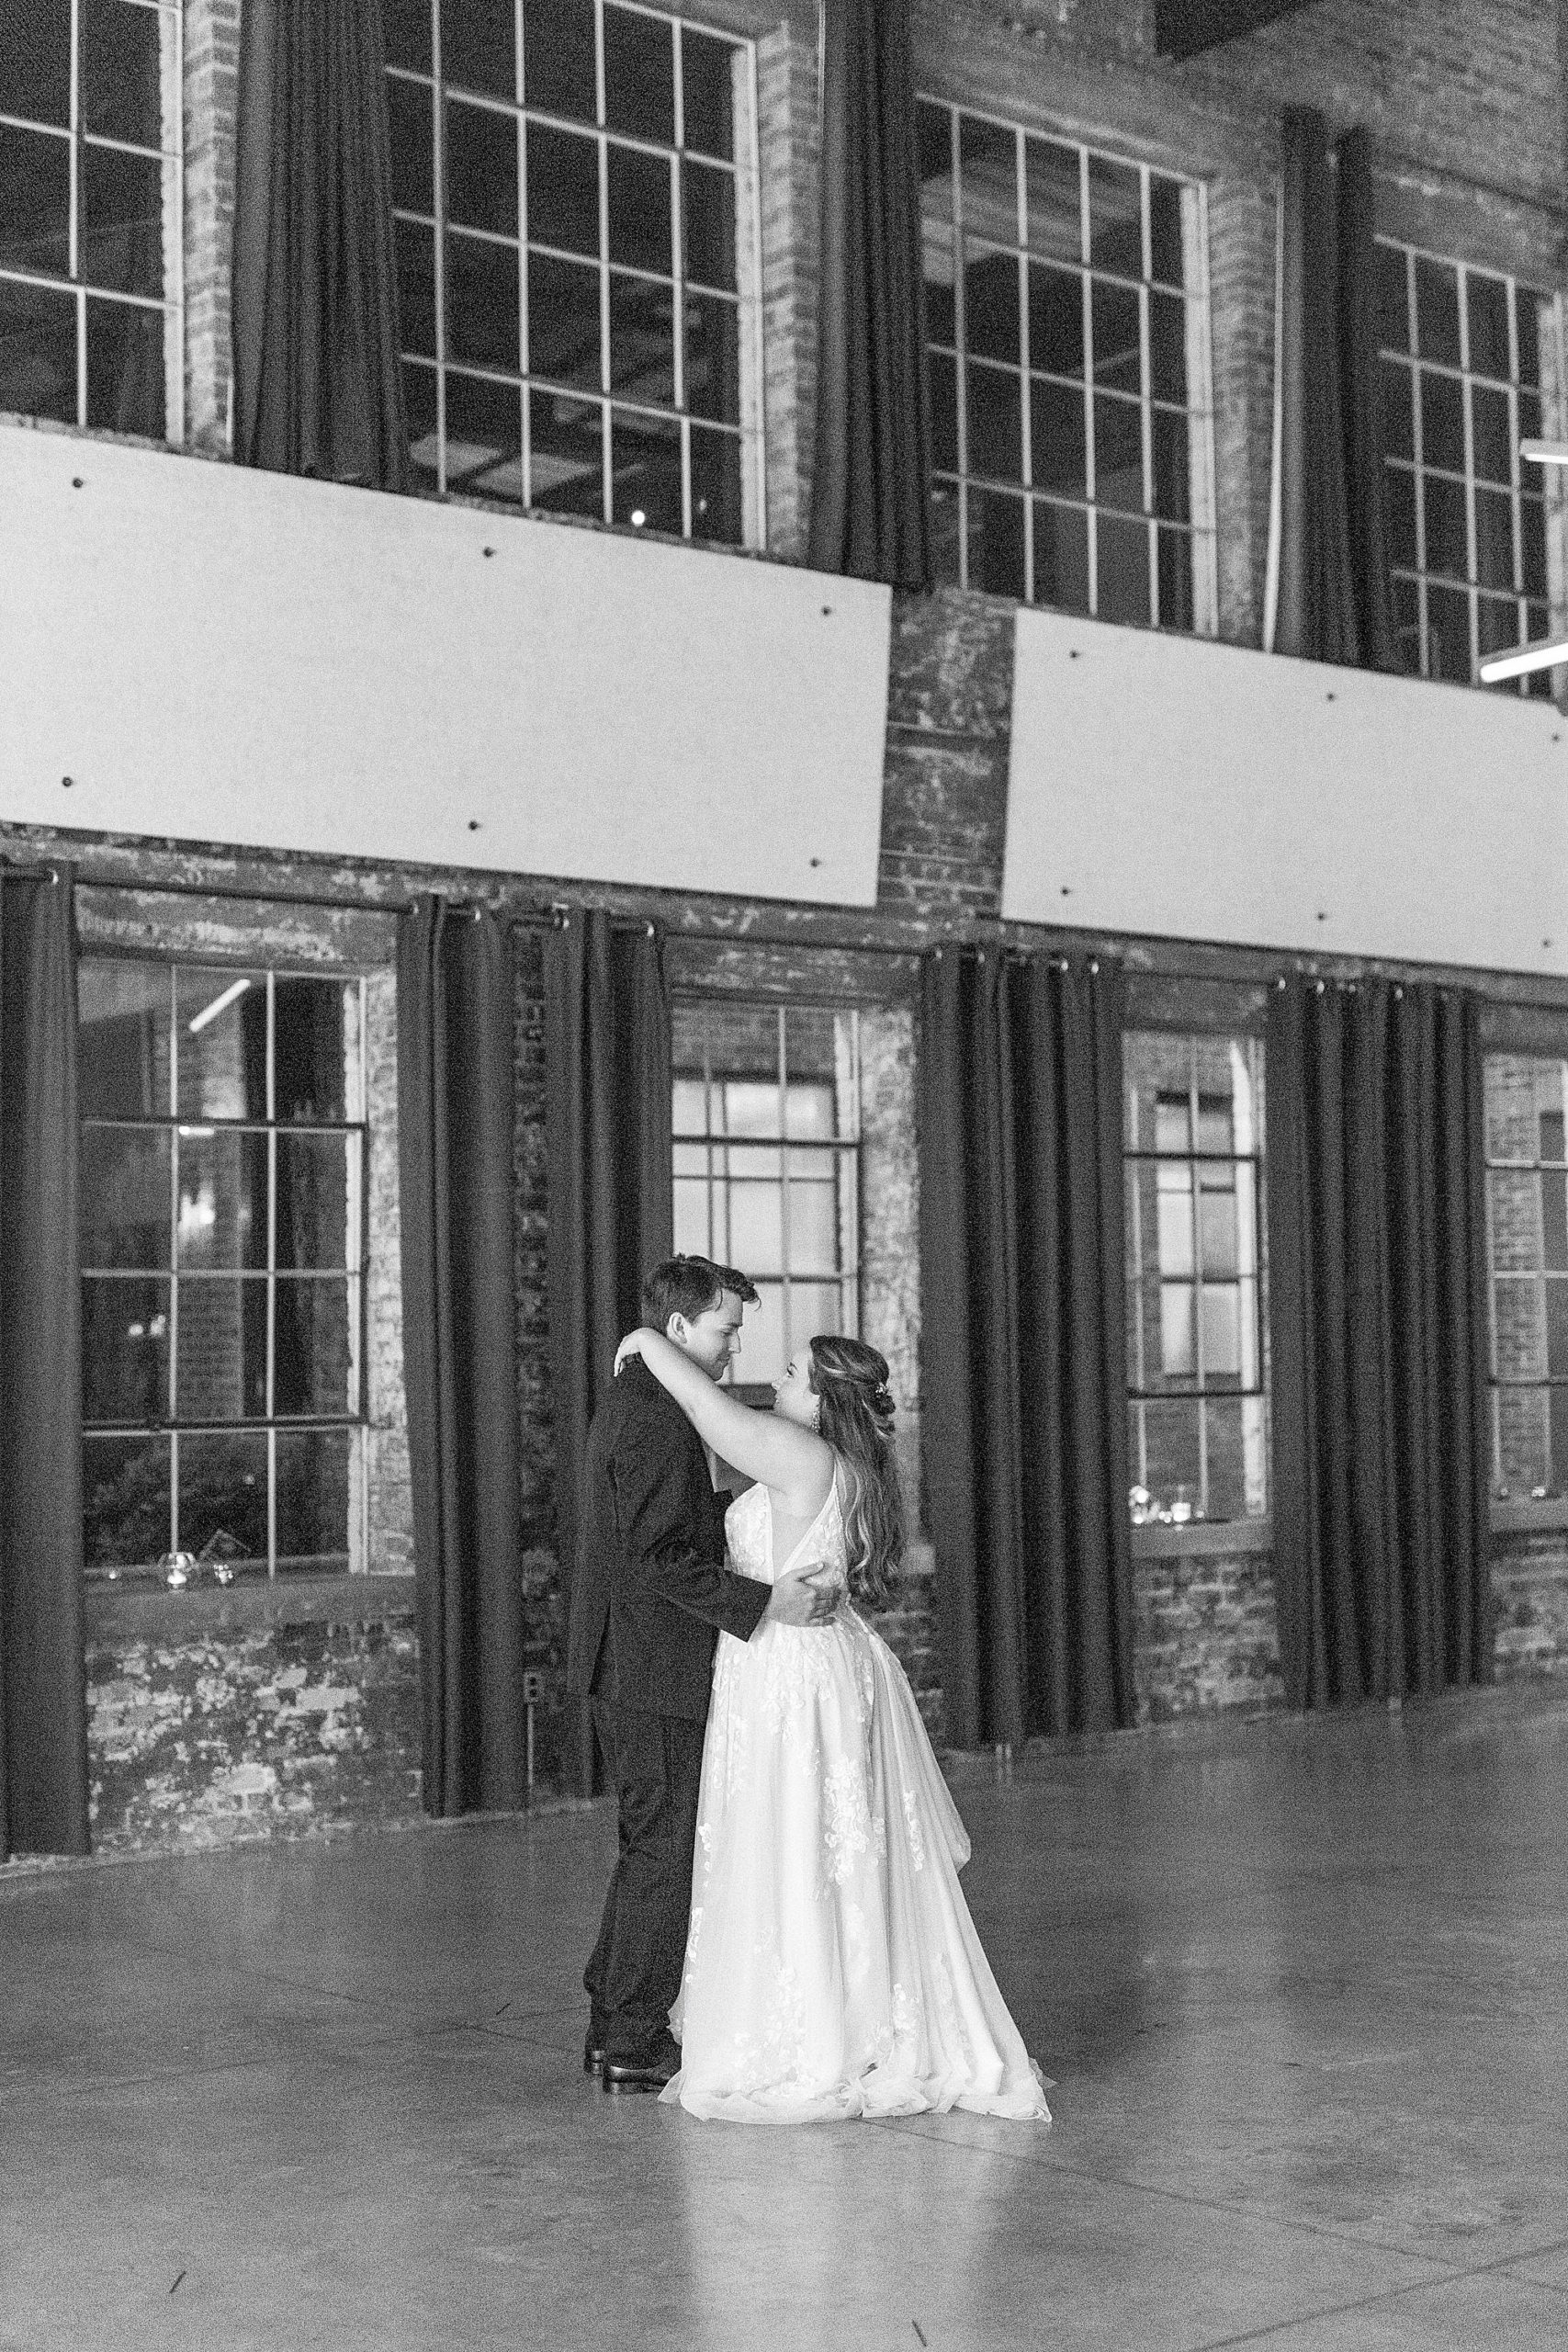 husband and wife have last dance at the Cadillac Service Garage